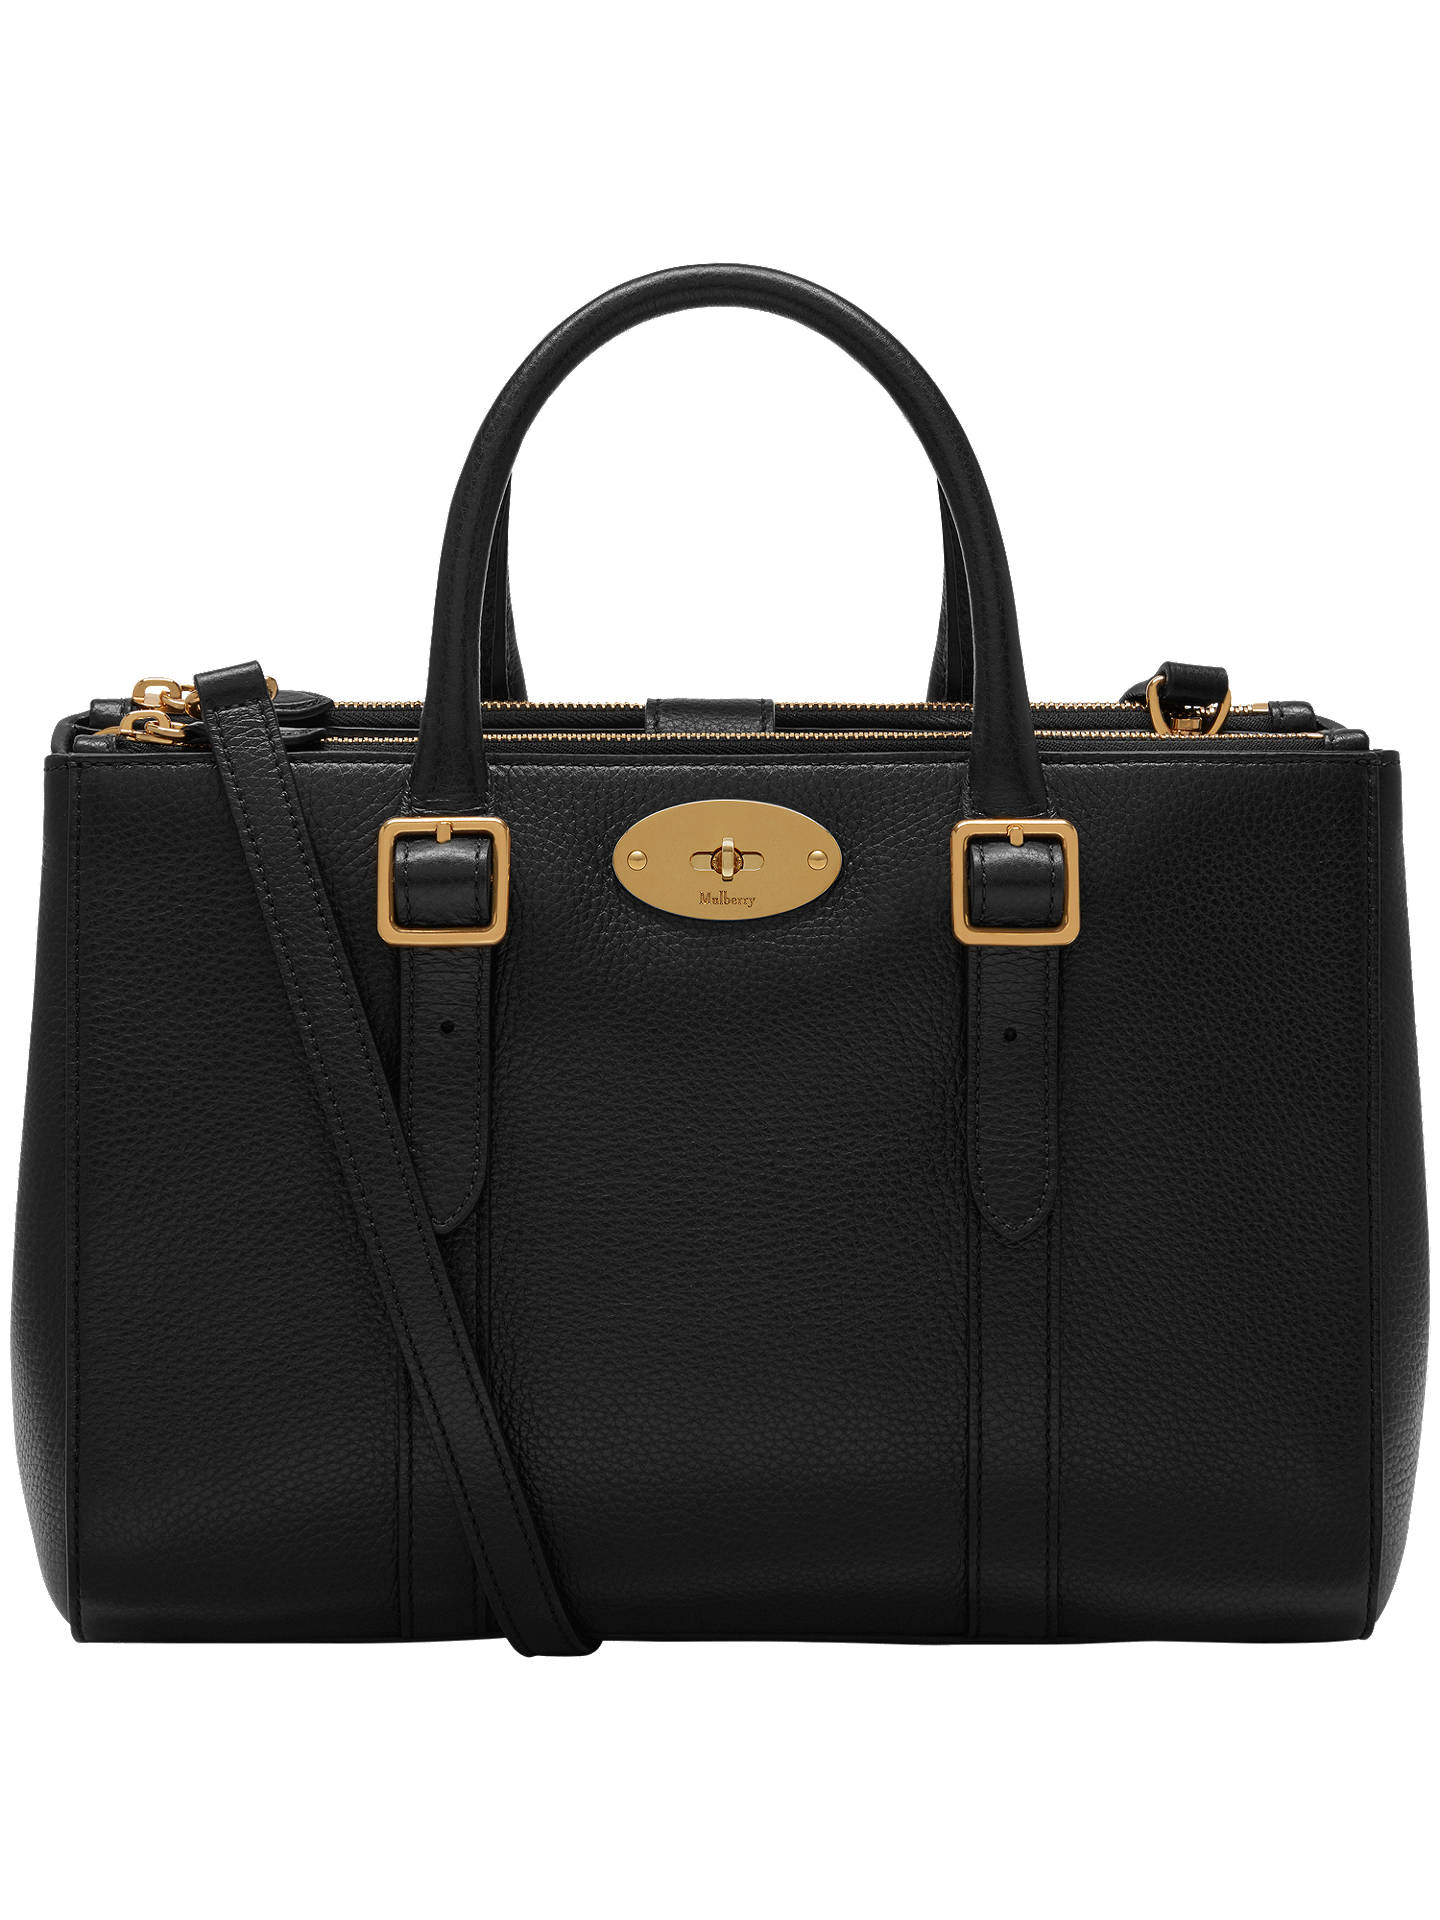 Mulberry Bayswater Leather Small Double Zip Tote Bag, Black at John ...